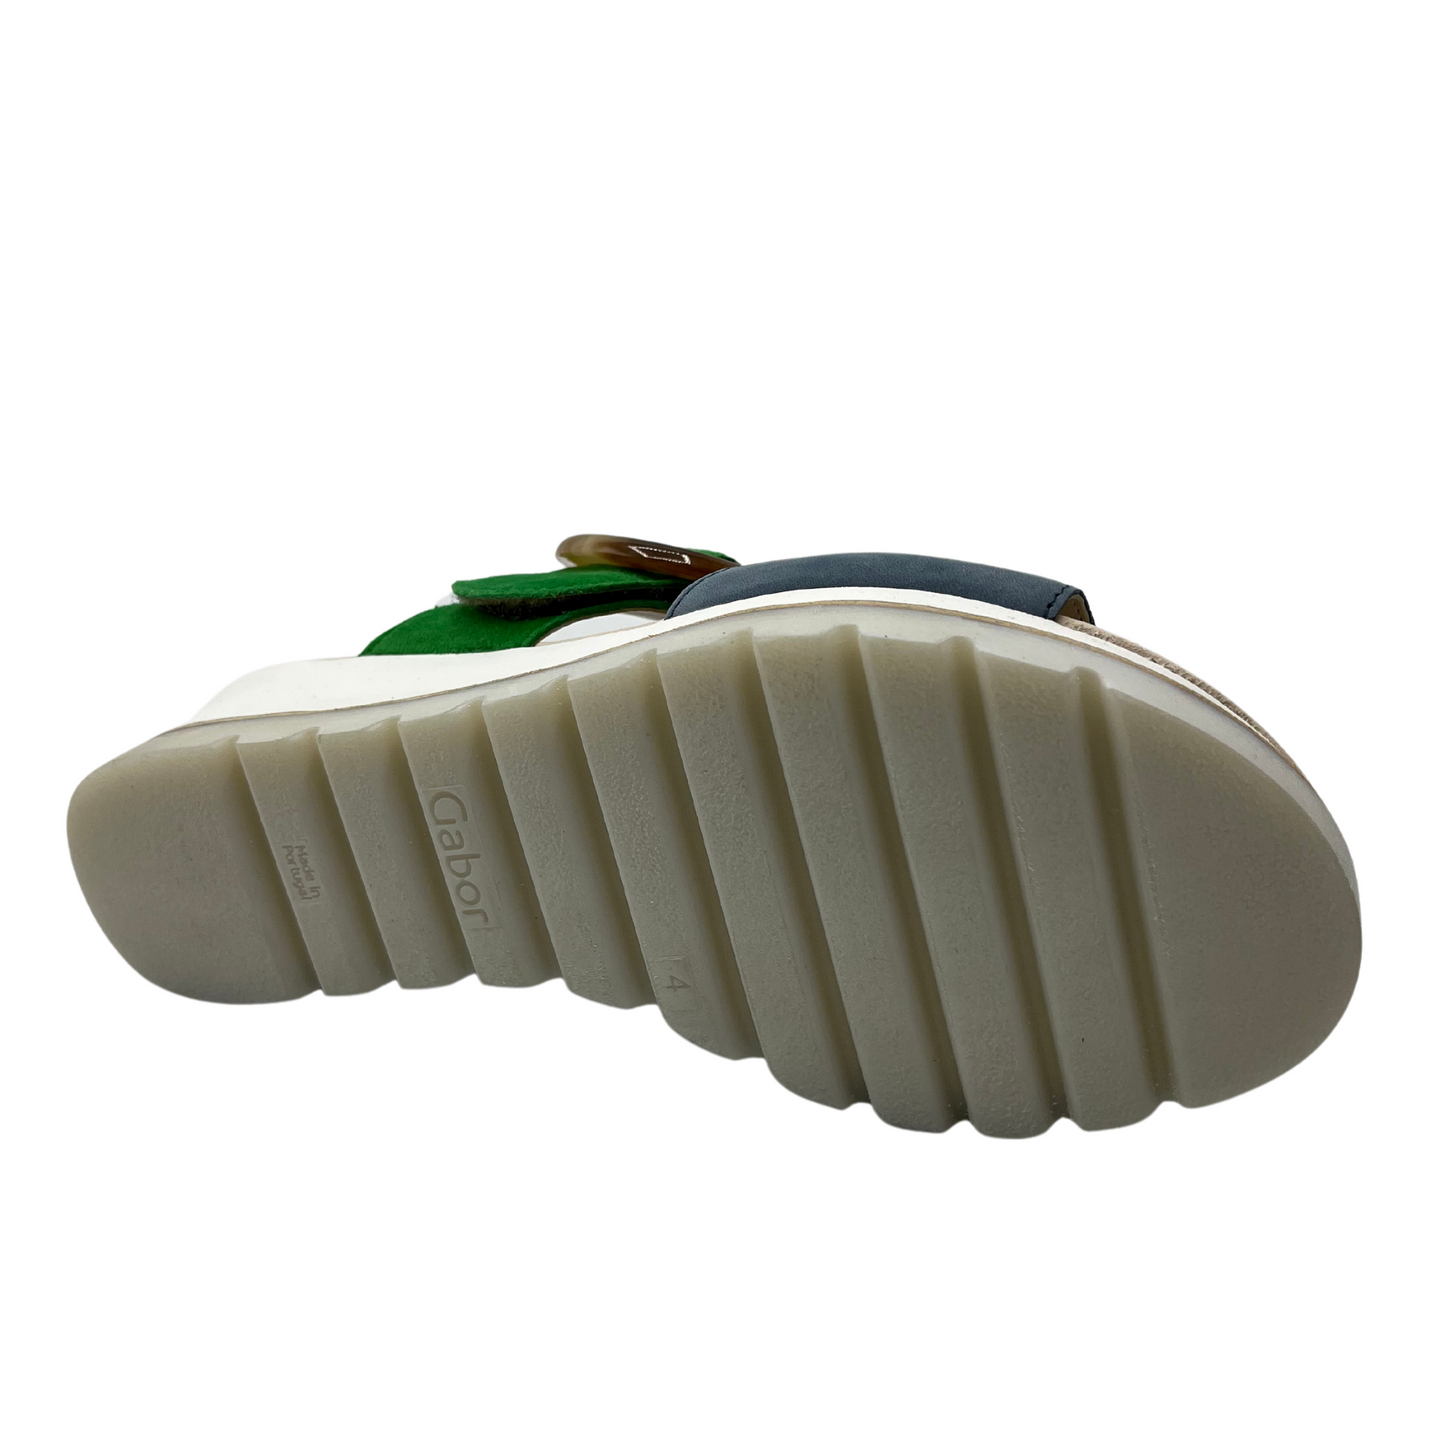 Bottom view of green and blue wedge sandal with white rubber outsole